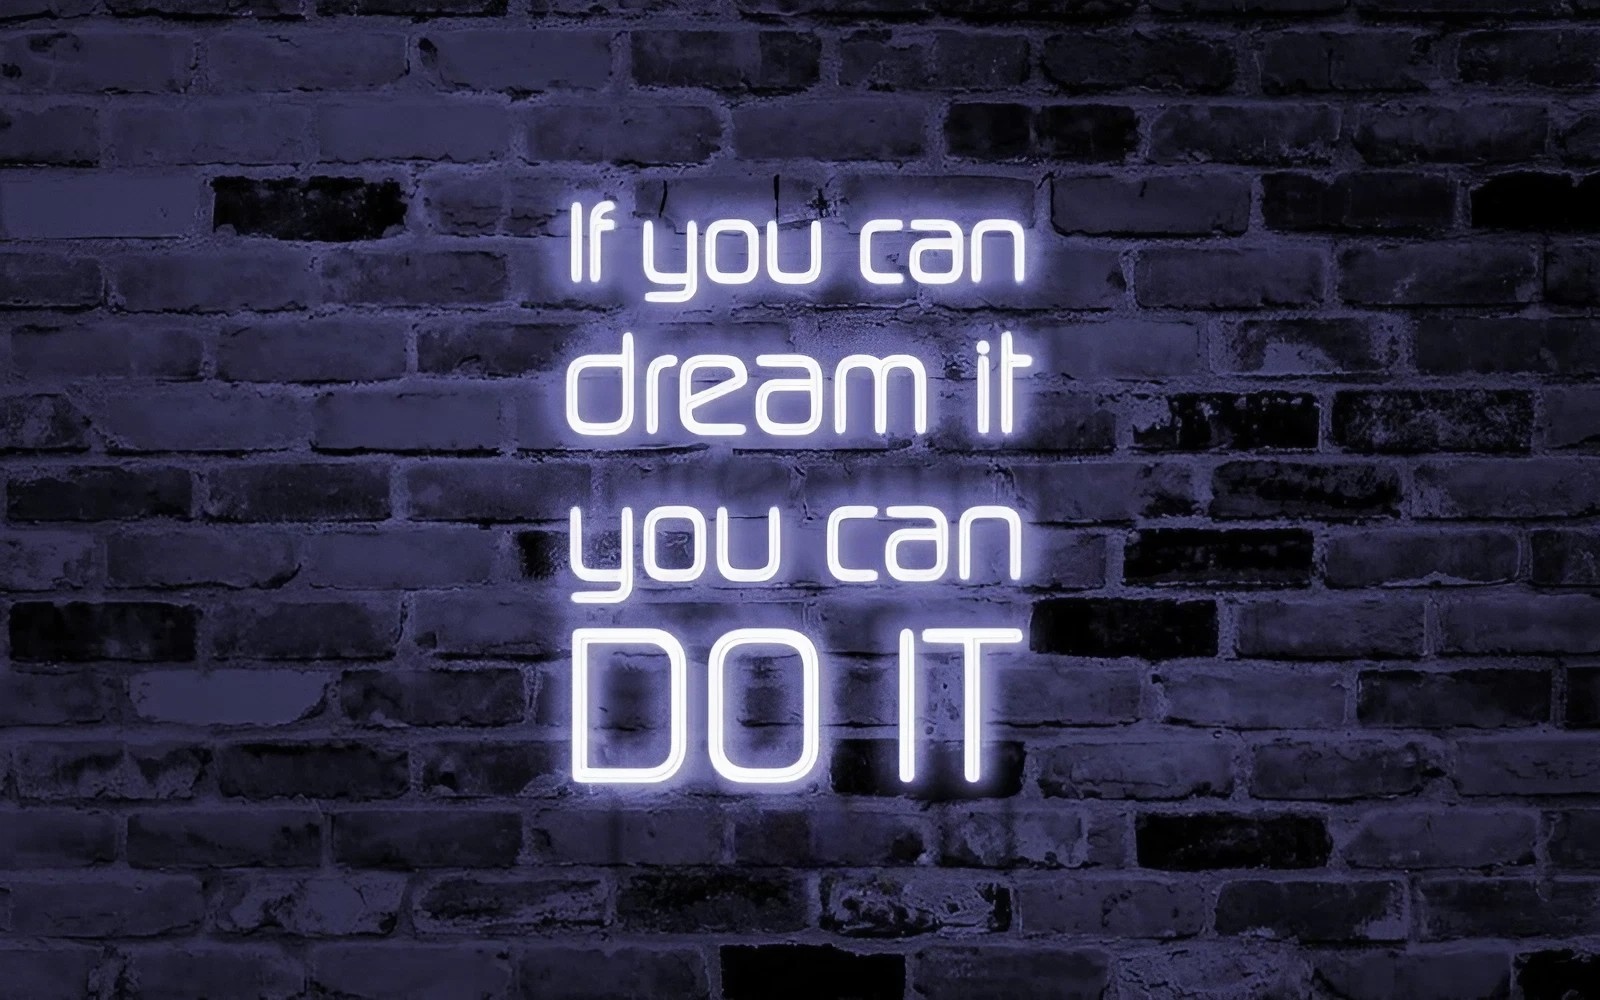 Iit Motivation - If You Can Dream It You Can Make It